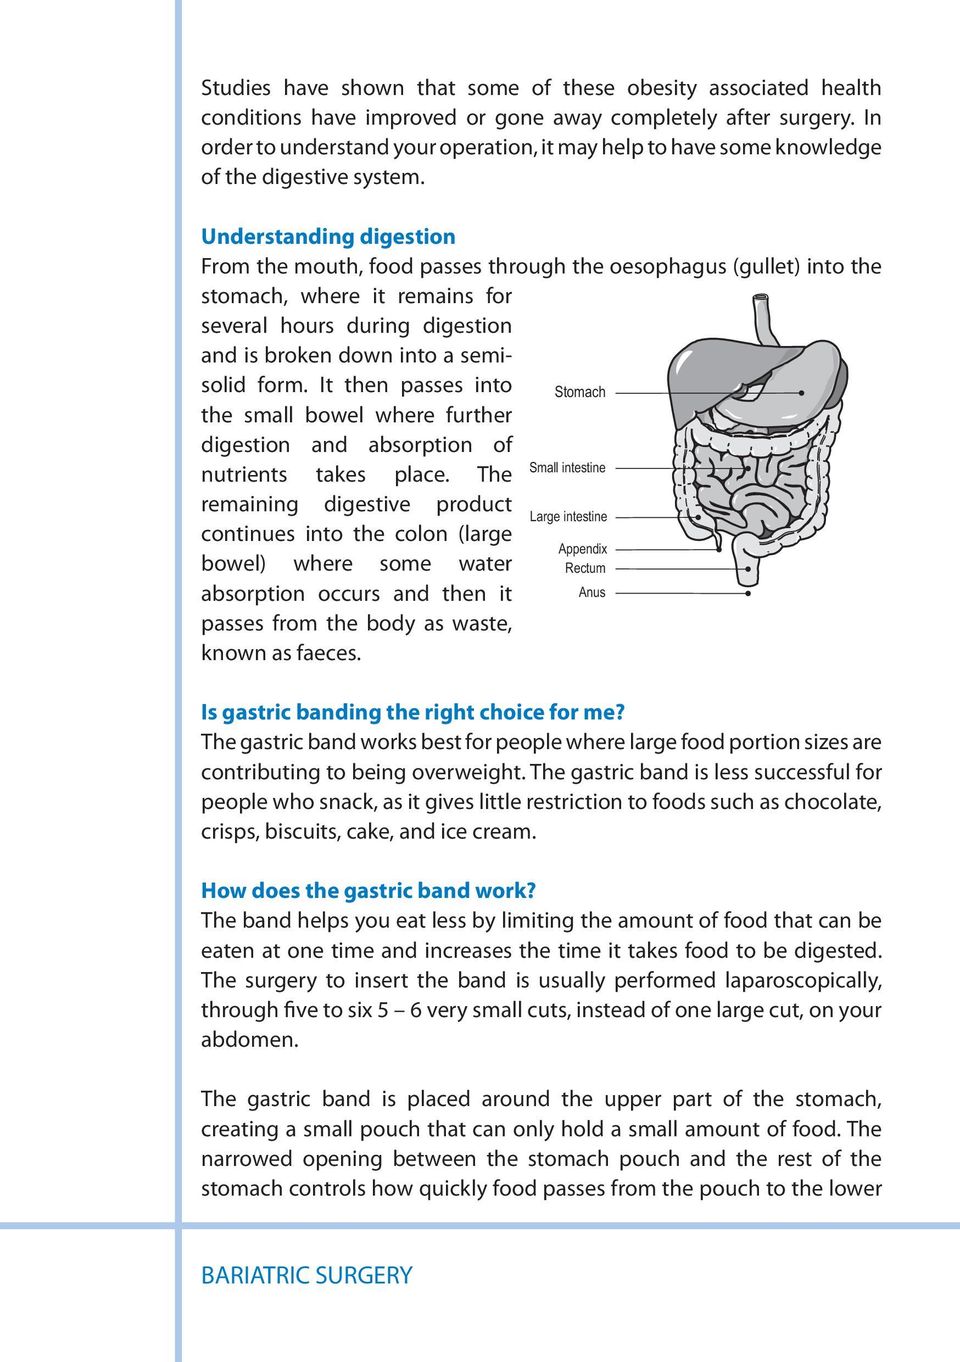 Understanding digestion From the mouth, food passes through the oesophagus (gullet) into the stomach, where it remains for several hours during digestion and is broken down into a semisolid form.